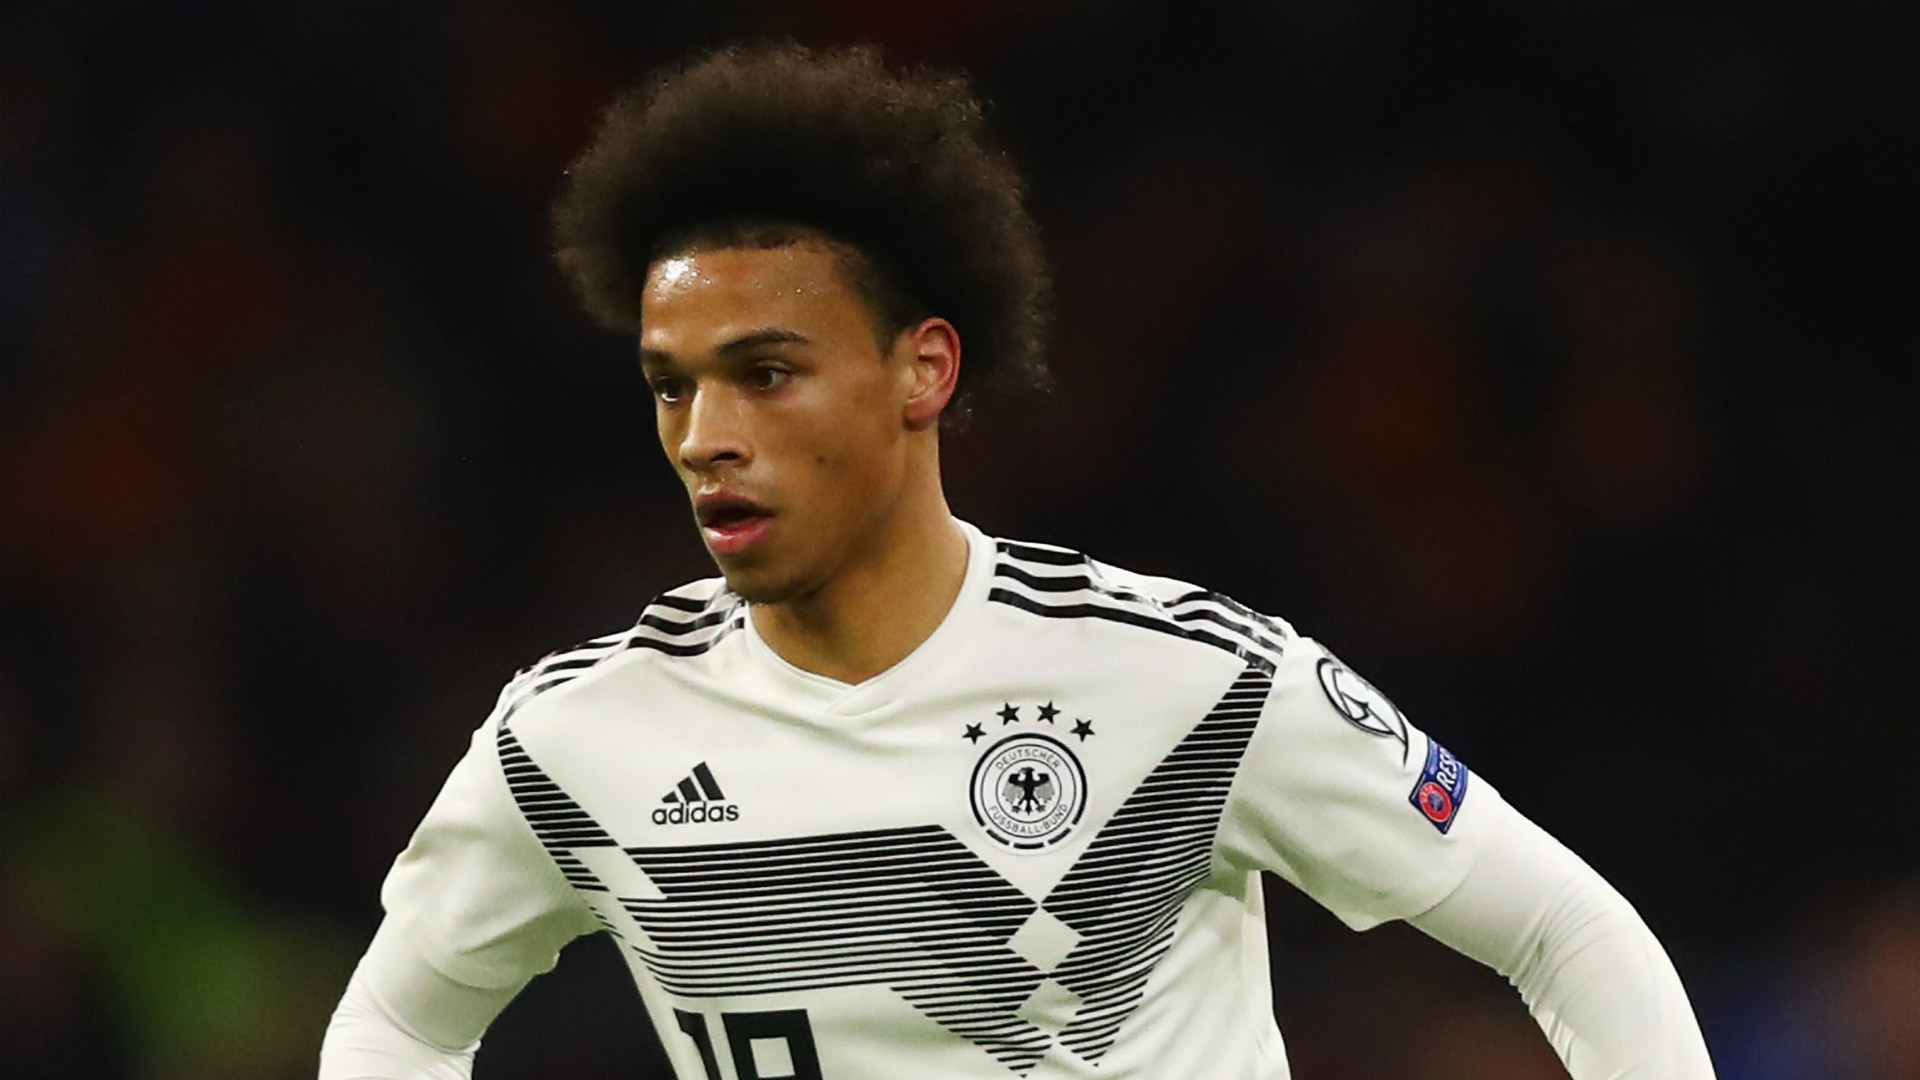 'In football anything can happen': Draxler unsure of Leroy Sane future amid Bayern ...